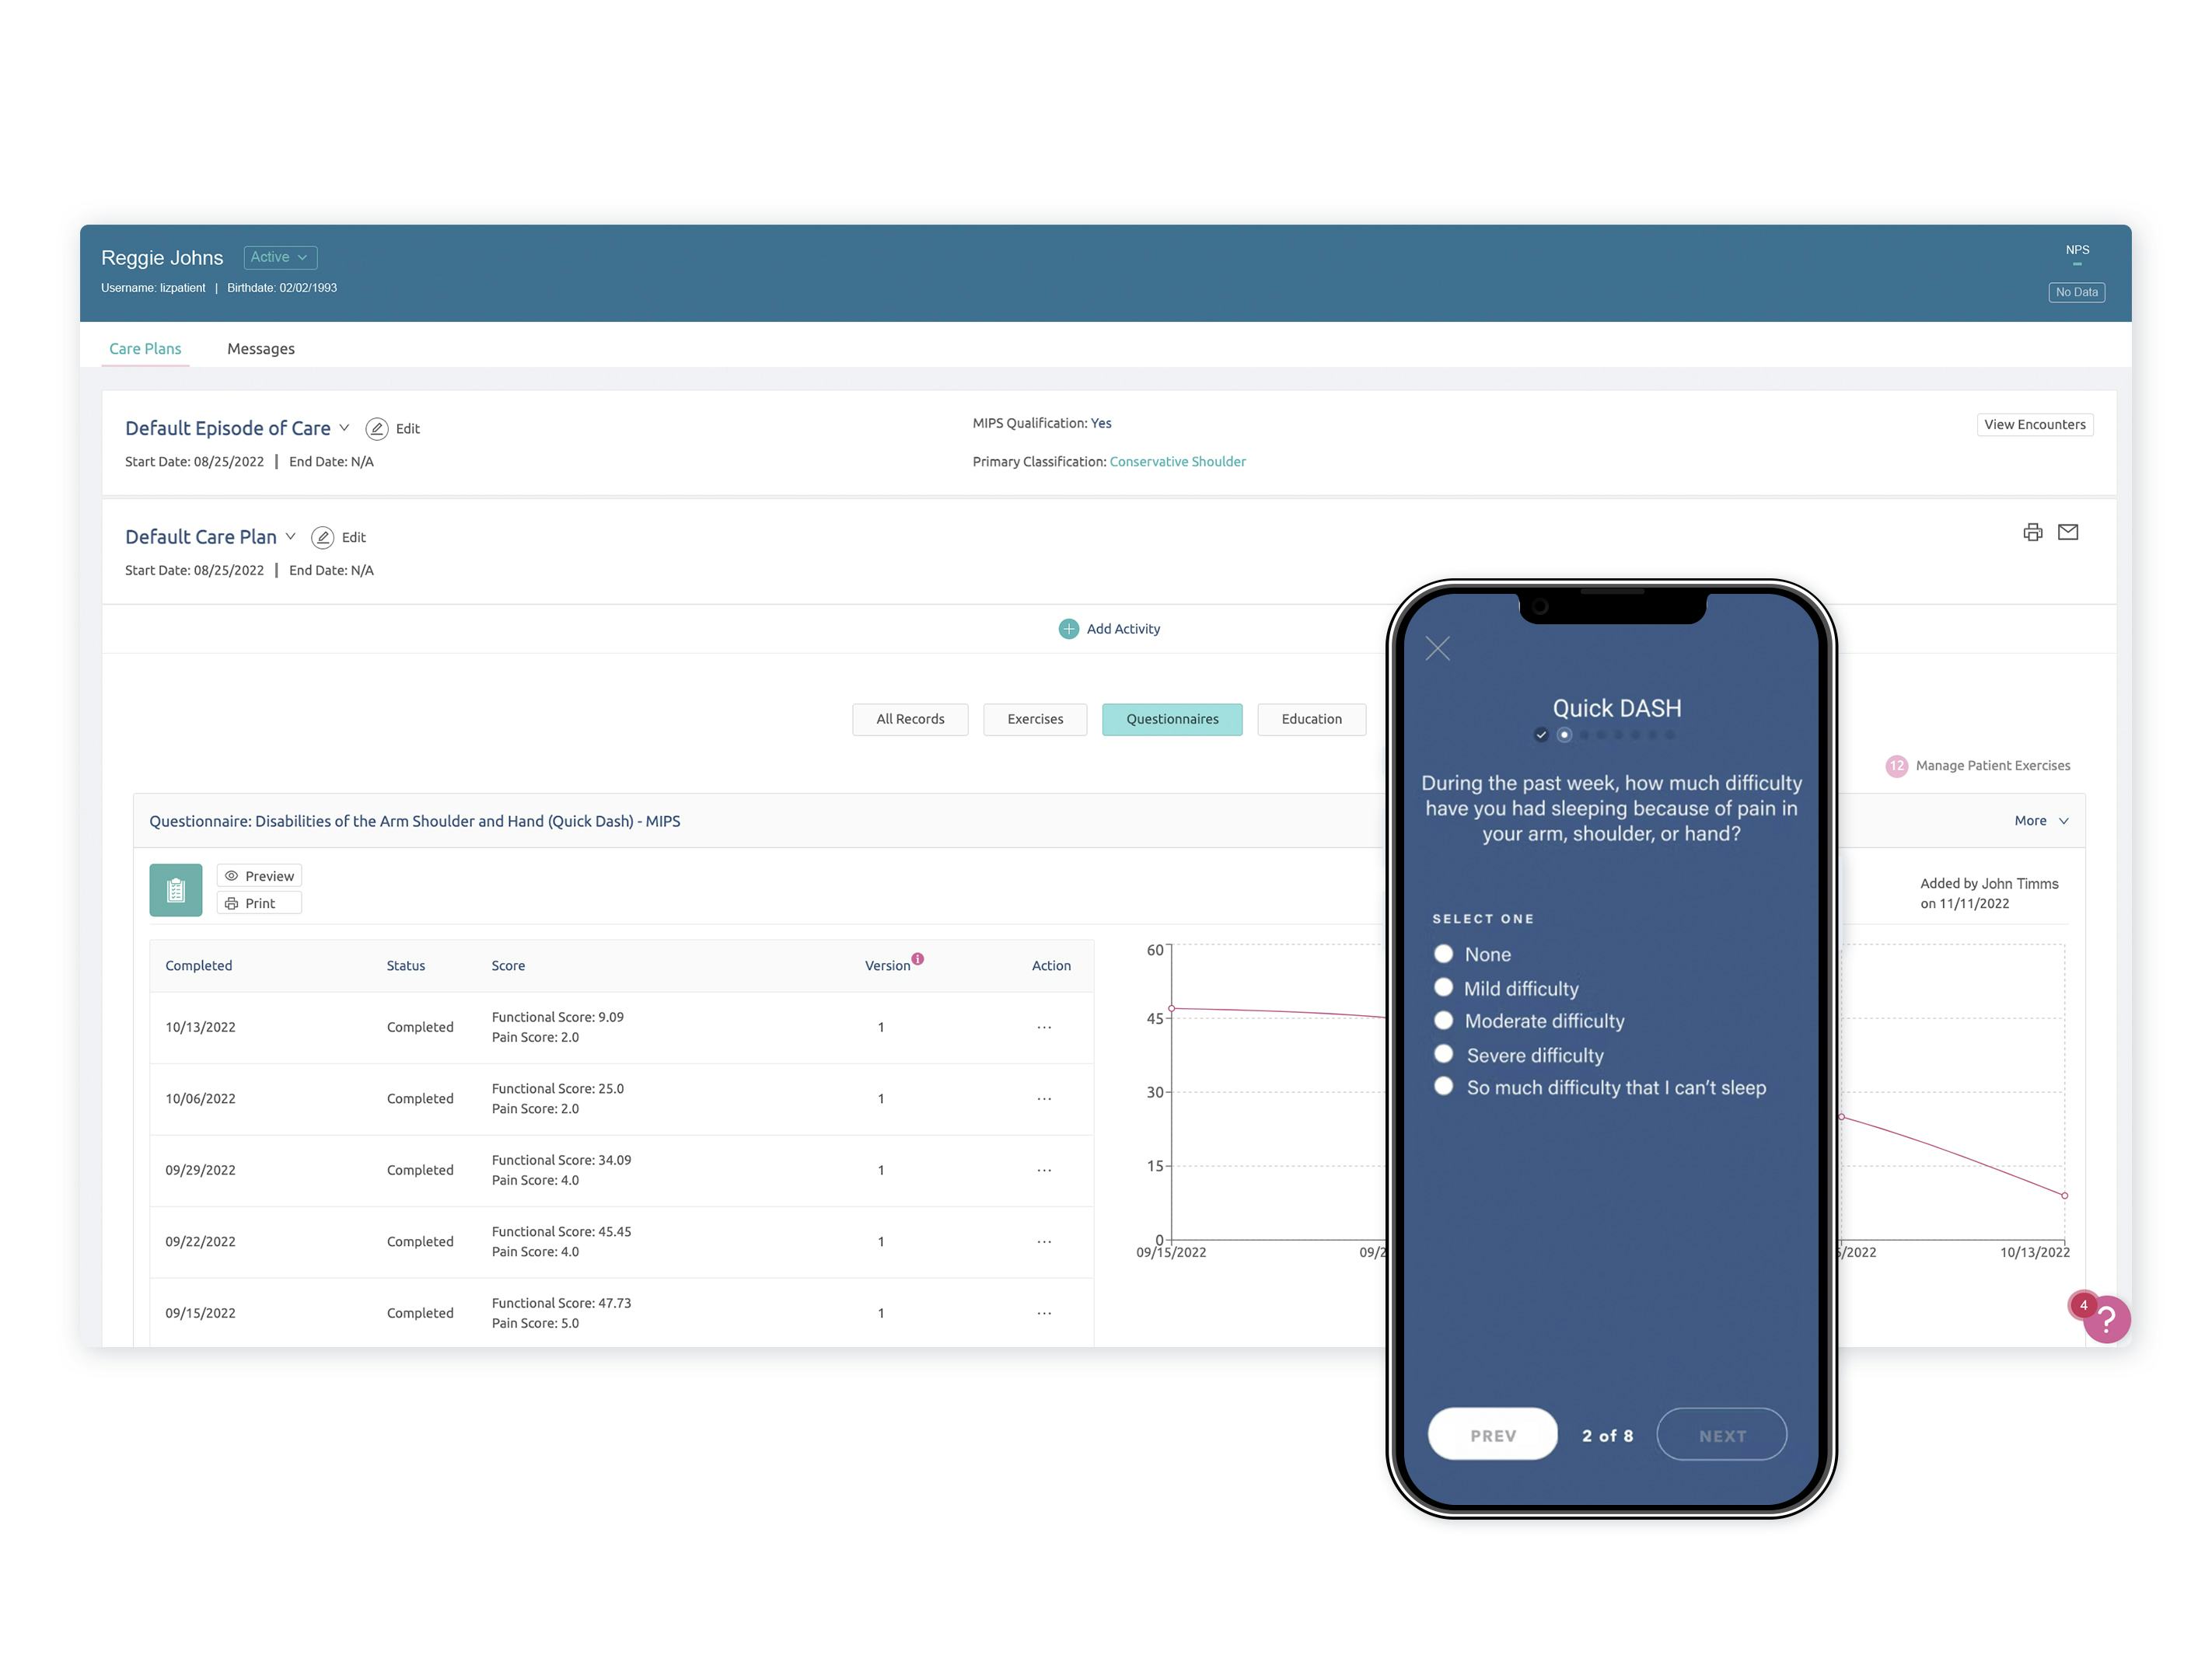 WebPT Software - Enhance patient care, optimize clinical operations, and easily fulfill quality measure reporting requirements with our outcomes tracking software & CMS-approved QCDR.